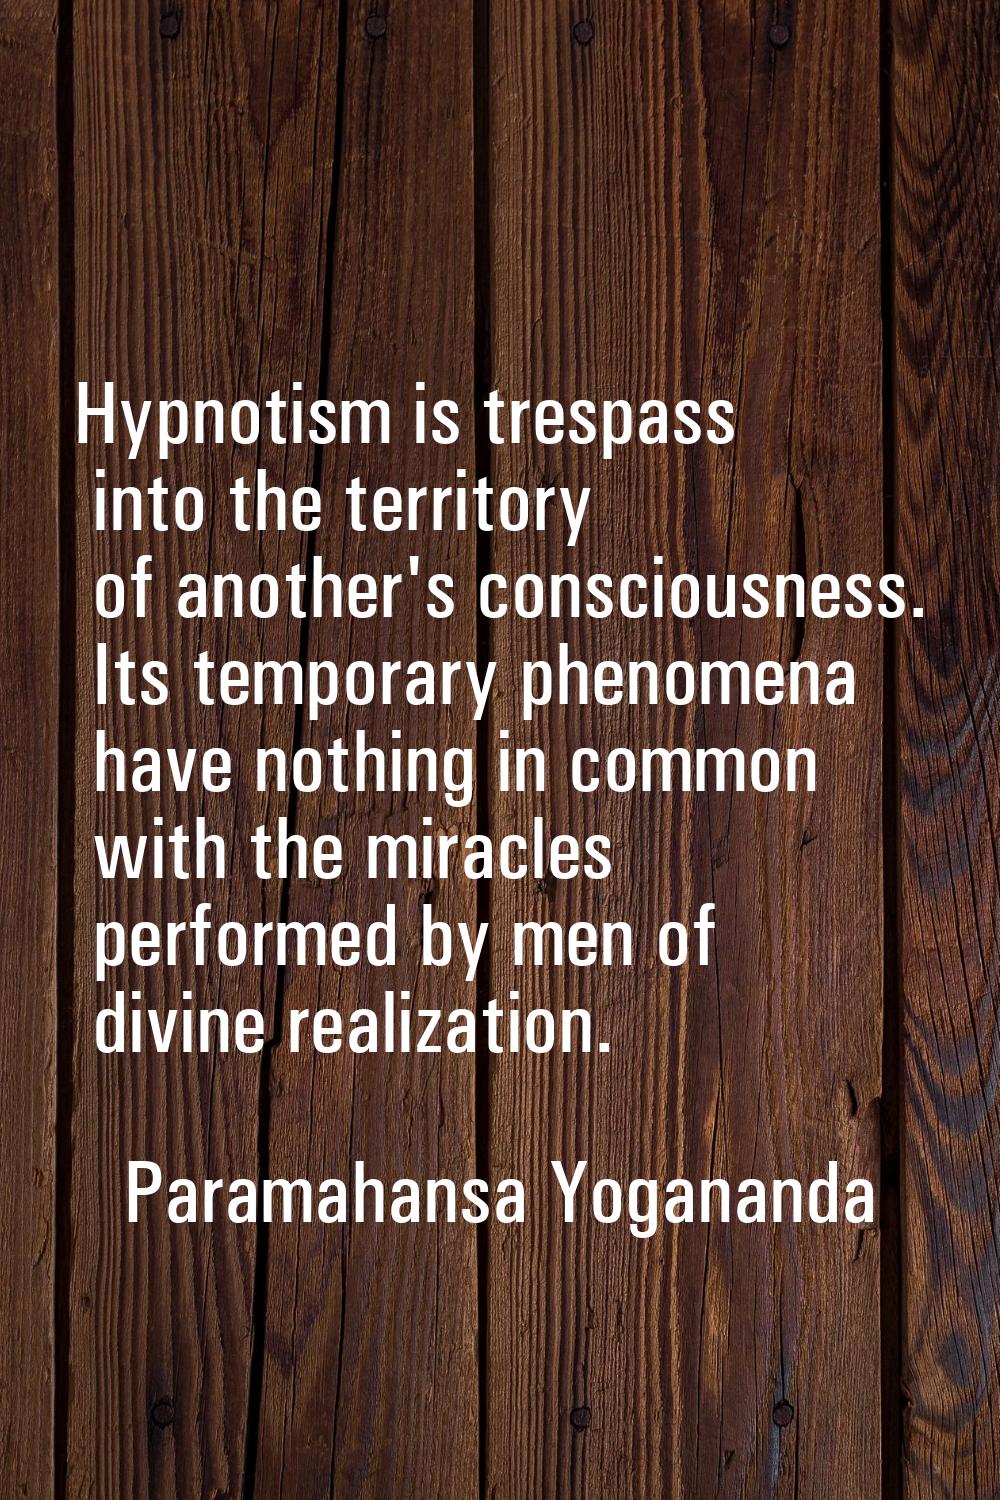 Hypnotism is trespass into the territory of another's consciousness. Its temporary phenomena have n